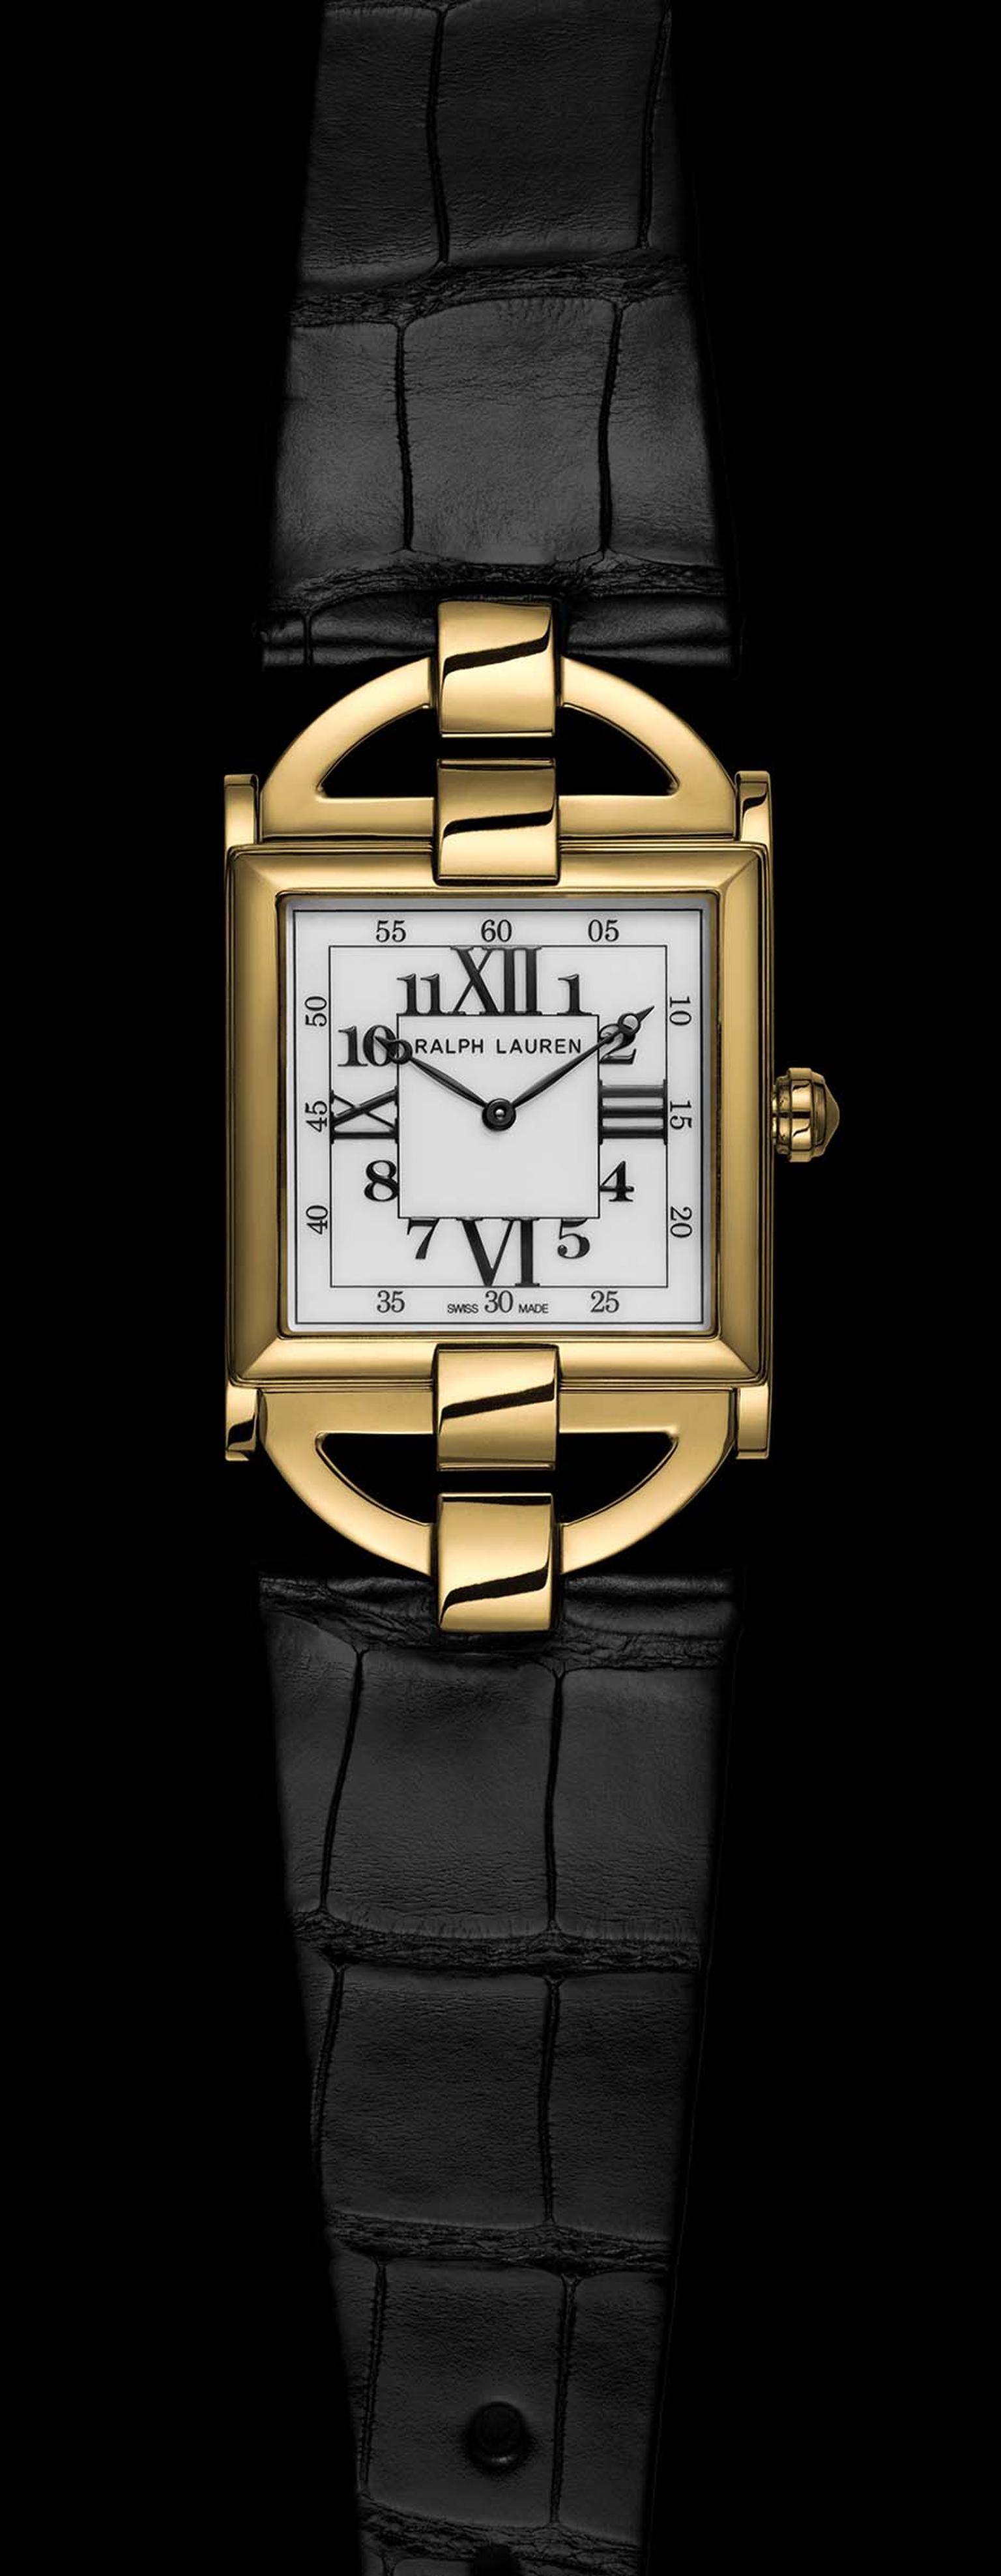 The spirit of Art Deco comes to life in the streamlined contours of the 867 Connoisseur watch and resonates in the beautiful square gold case with its stepped flanks and gently arched profile.